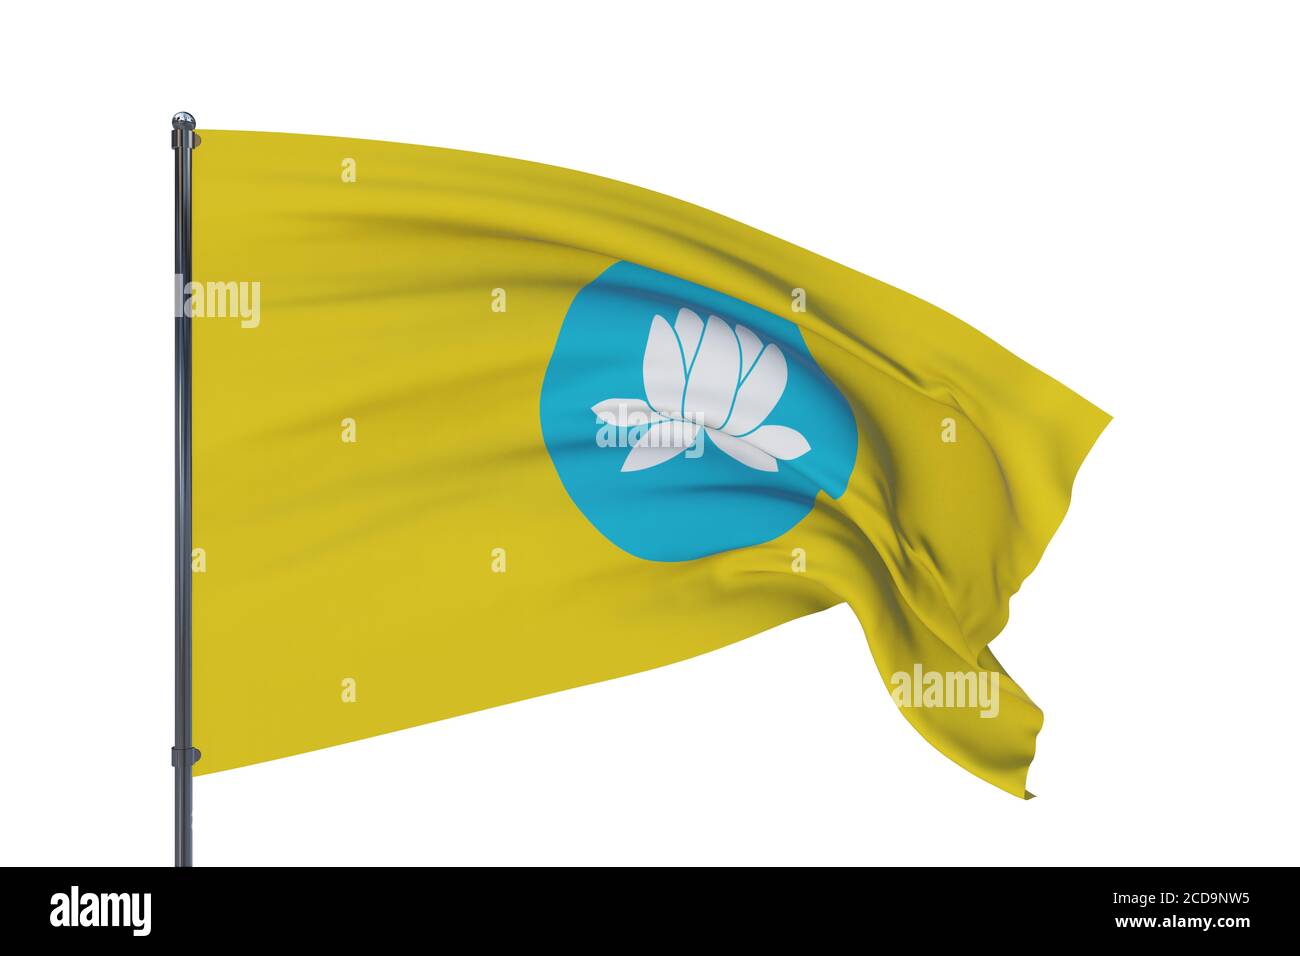 Flag of Kalmykia. 3D illustration isolated on white background. Flags of the federal subjects of Russia. Stock Photo